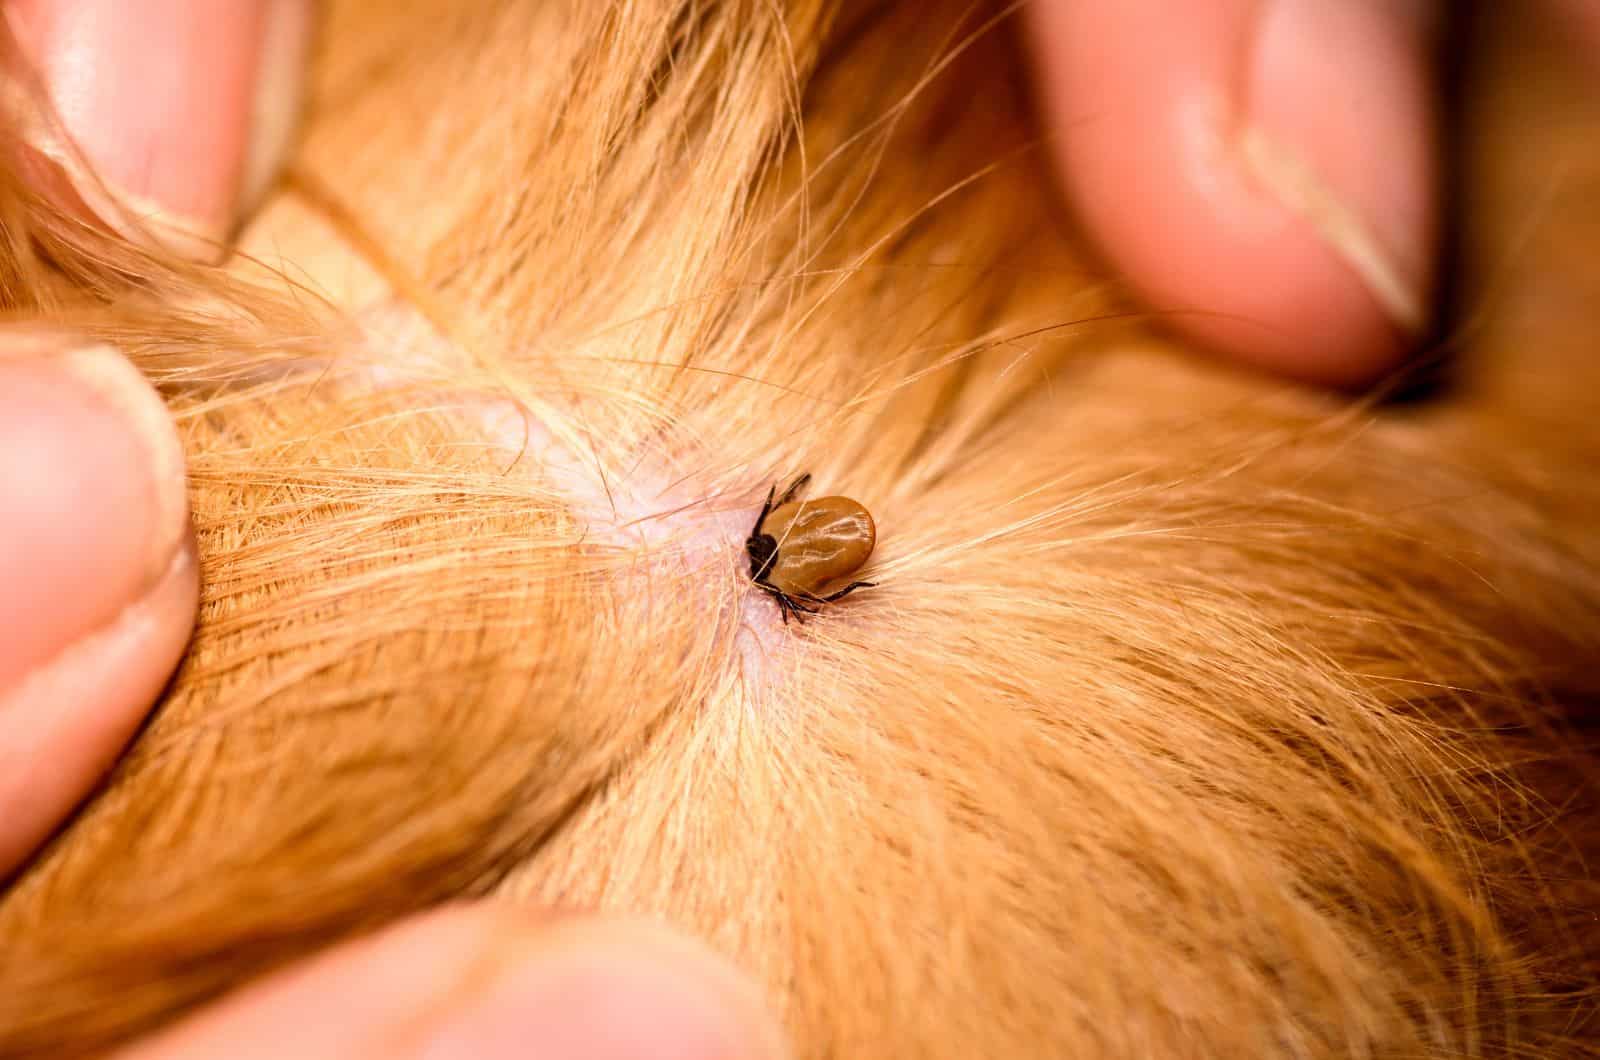 What’s With That Tick Scab On Dog? Tick Removal 101